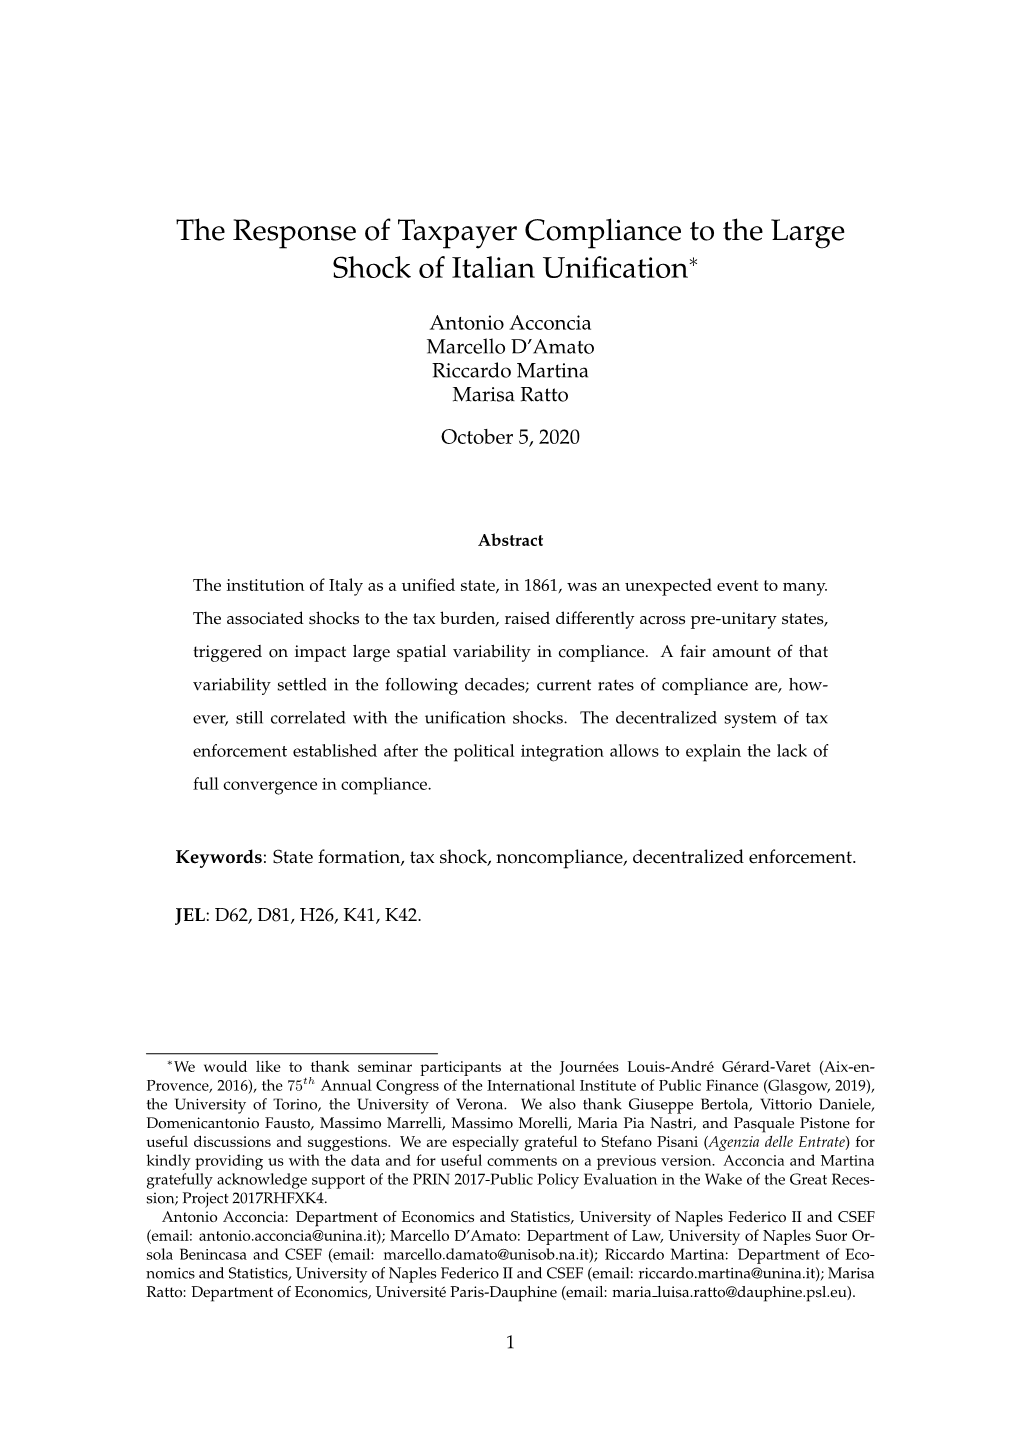 The Response of Taxpayer Compliance to the Large Shock of Italian Uniﬁcation∗